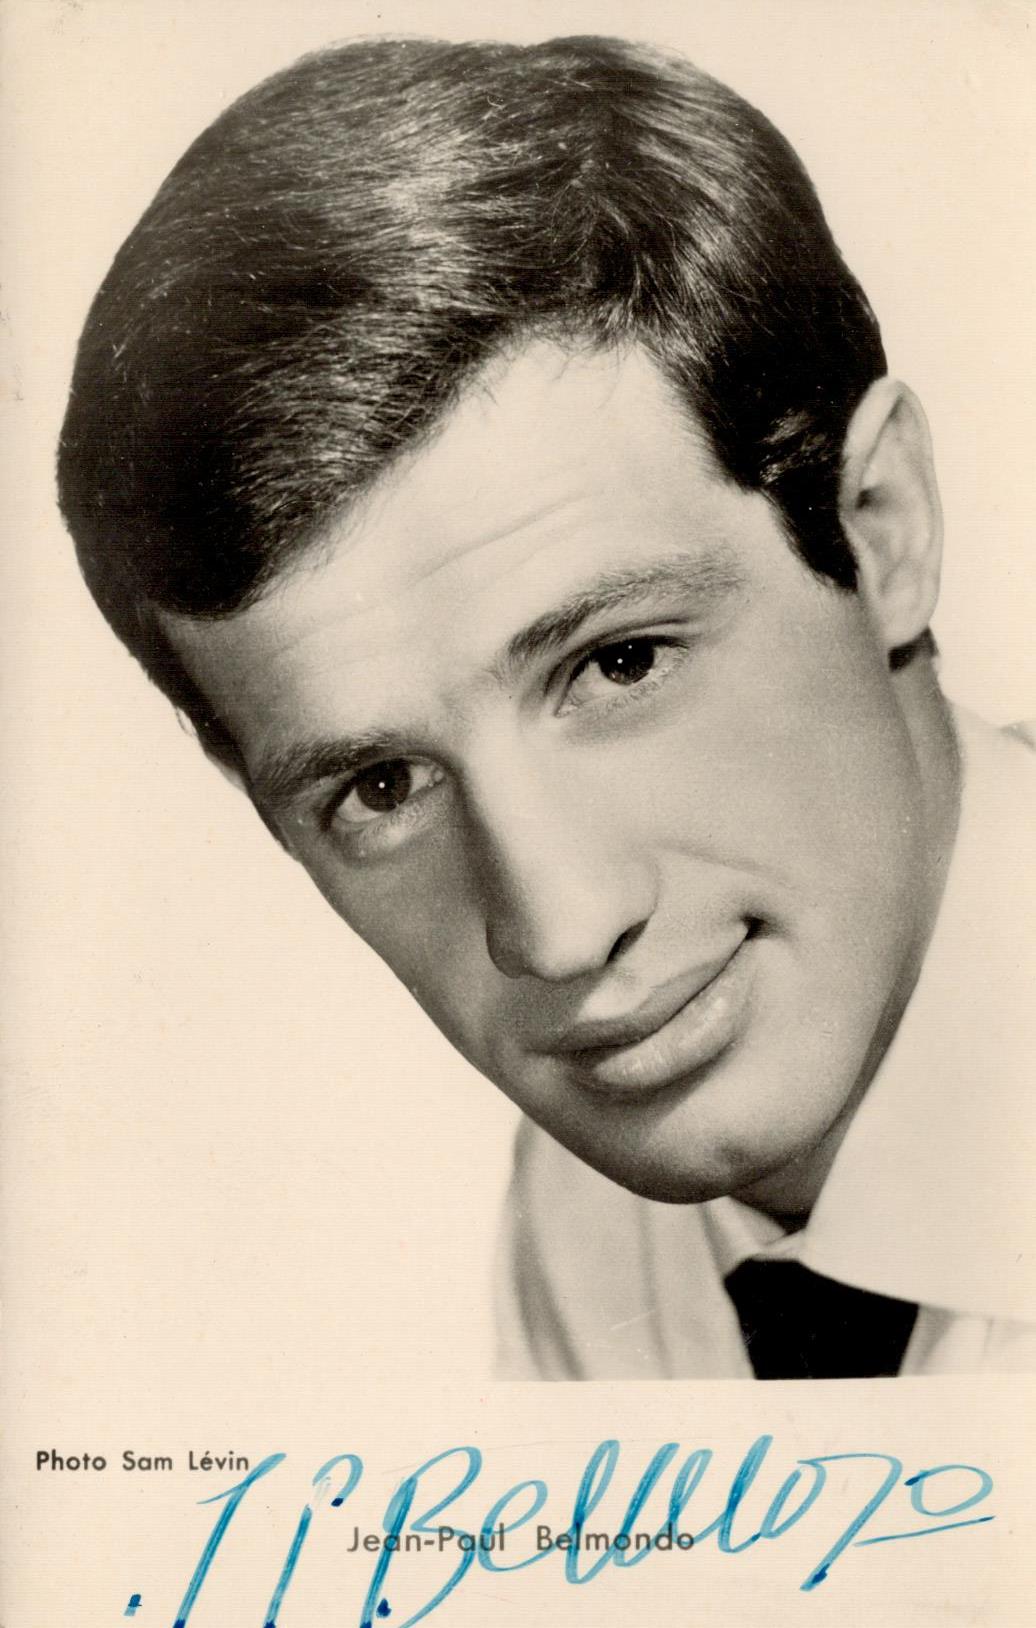 TV Film Jean-Paul Belmondo signed 6x4 black and white photo. 9 April 1933 - 6 September 2021 was a